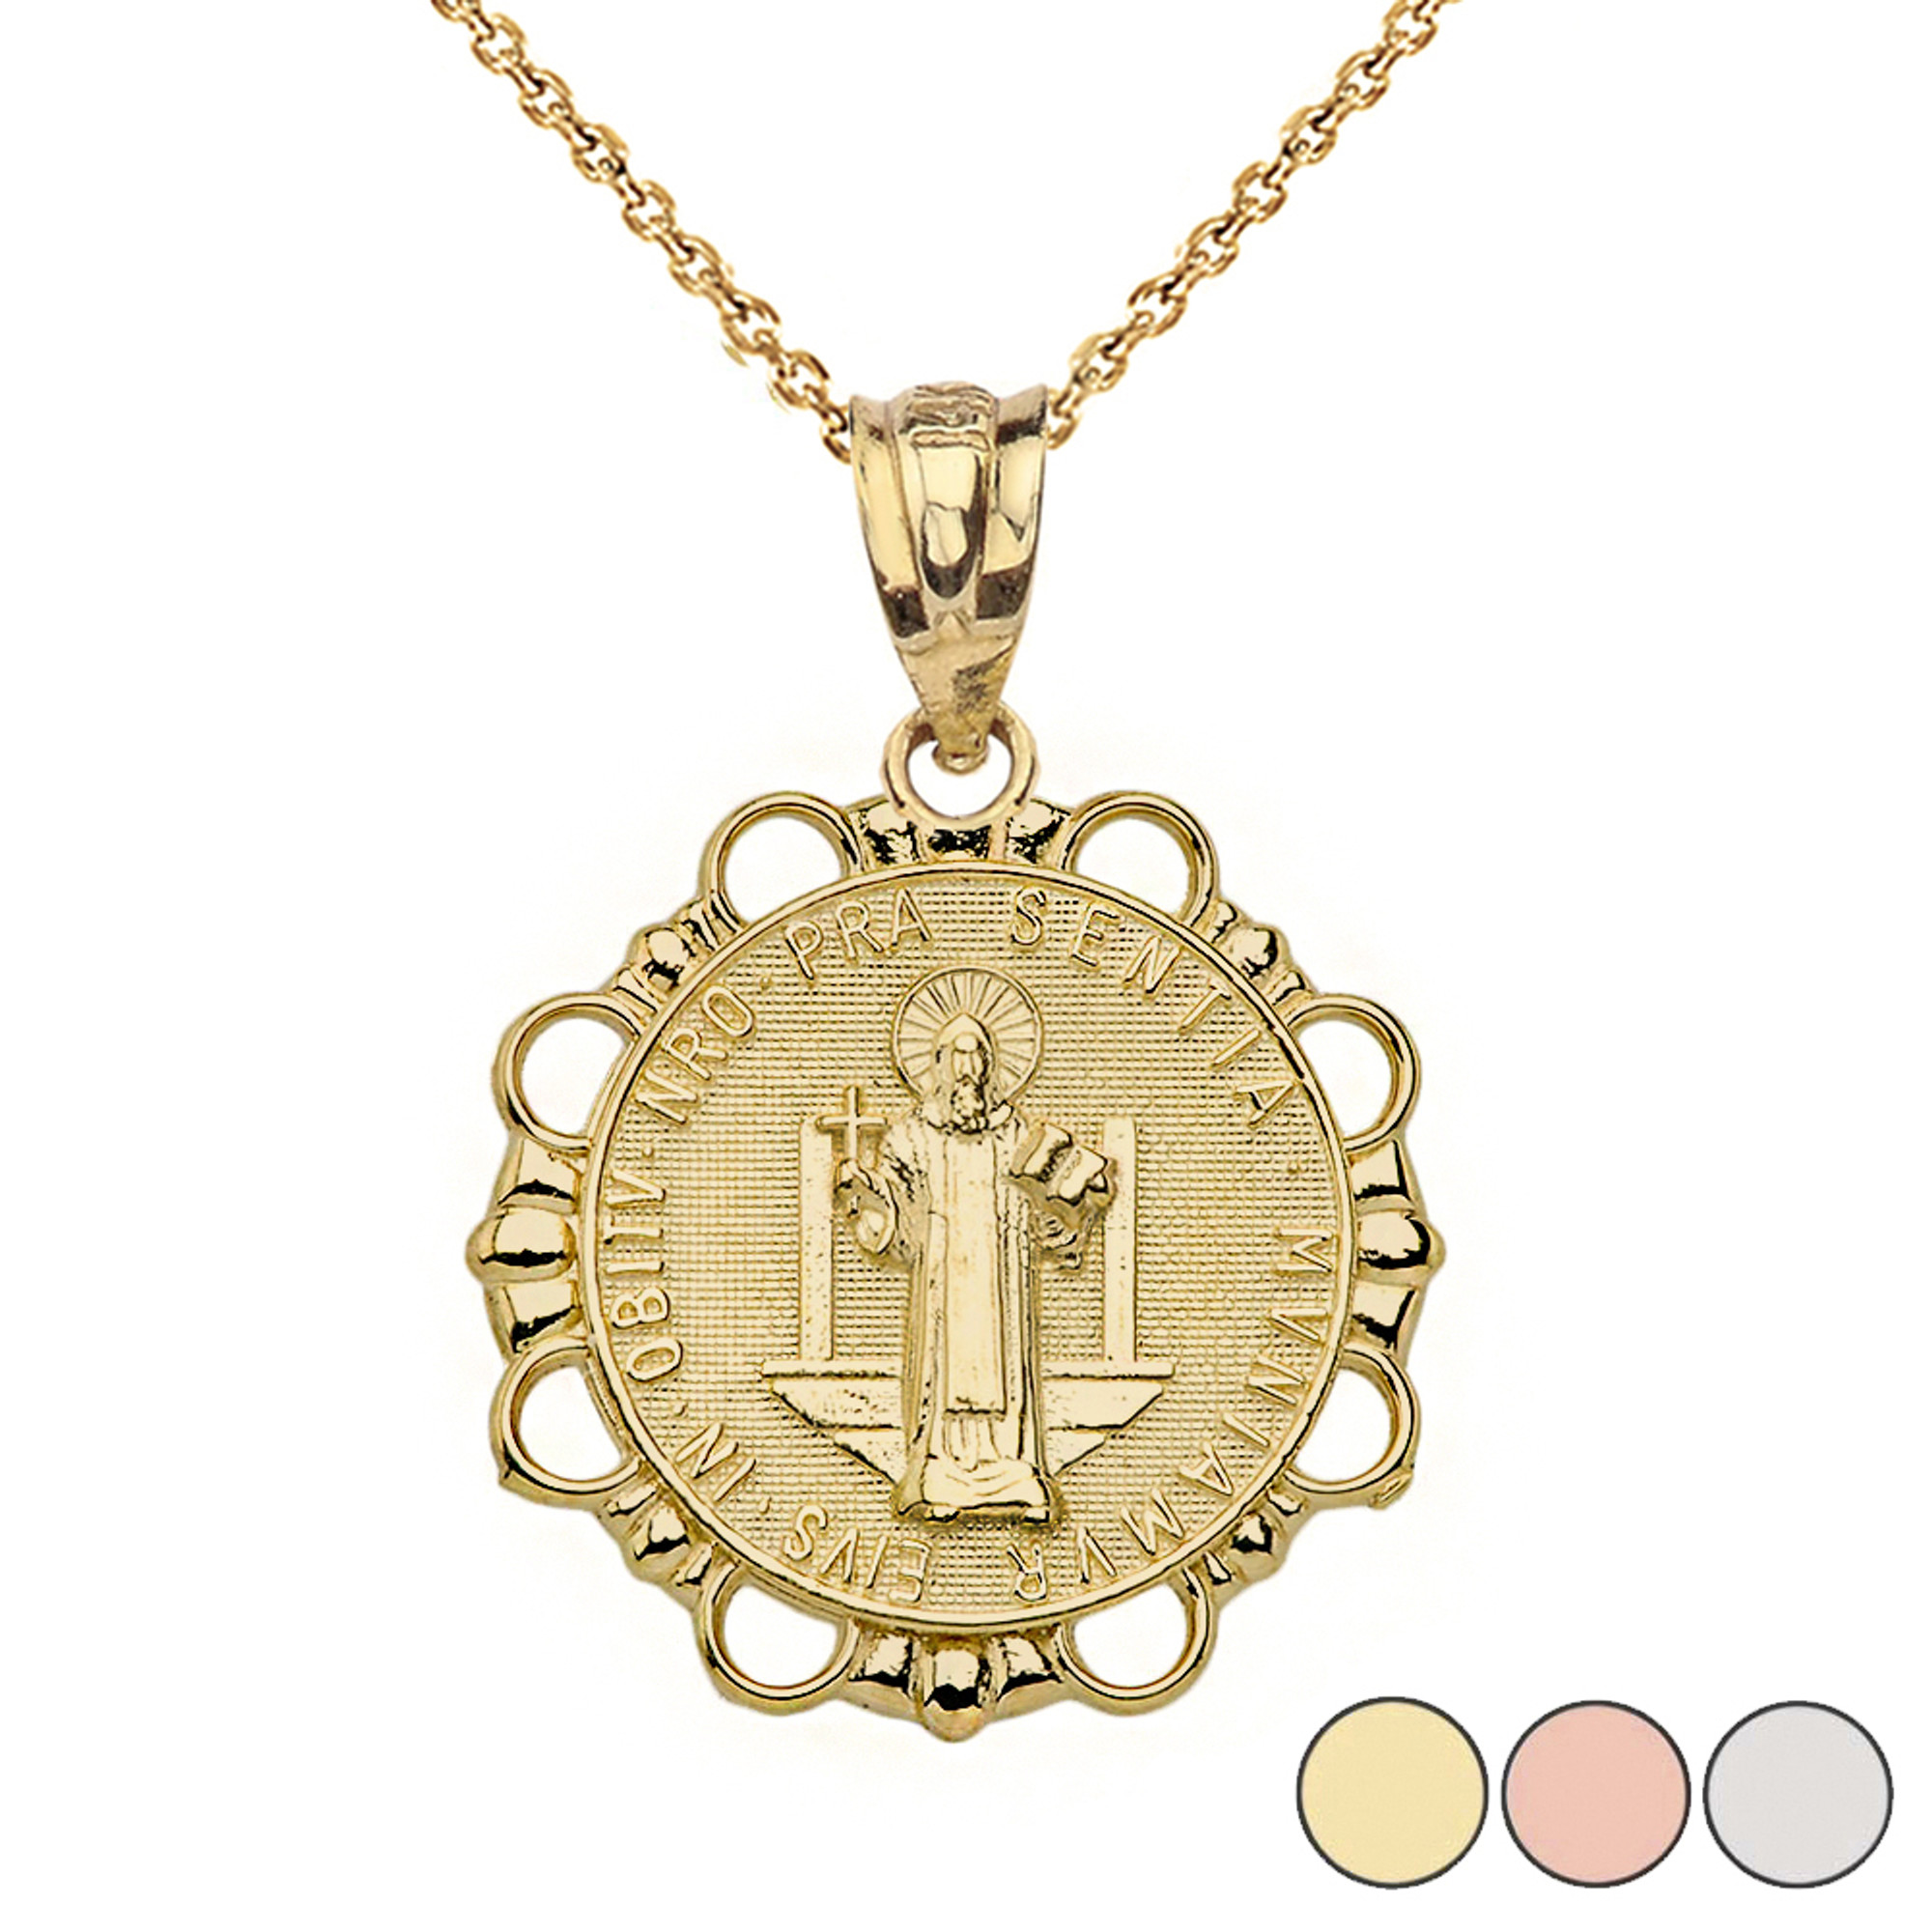 Round Saint Benito Pendant Necklace in Gold (Yellow/Rose/White)